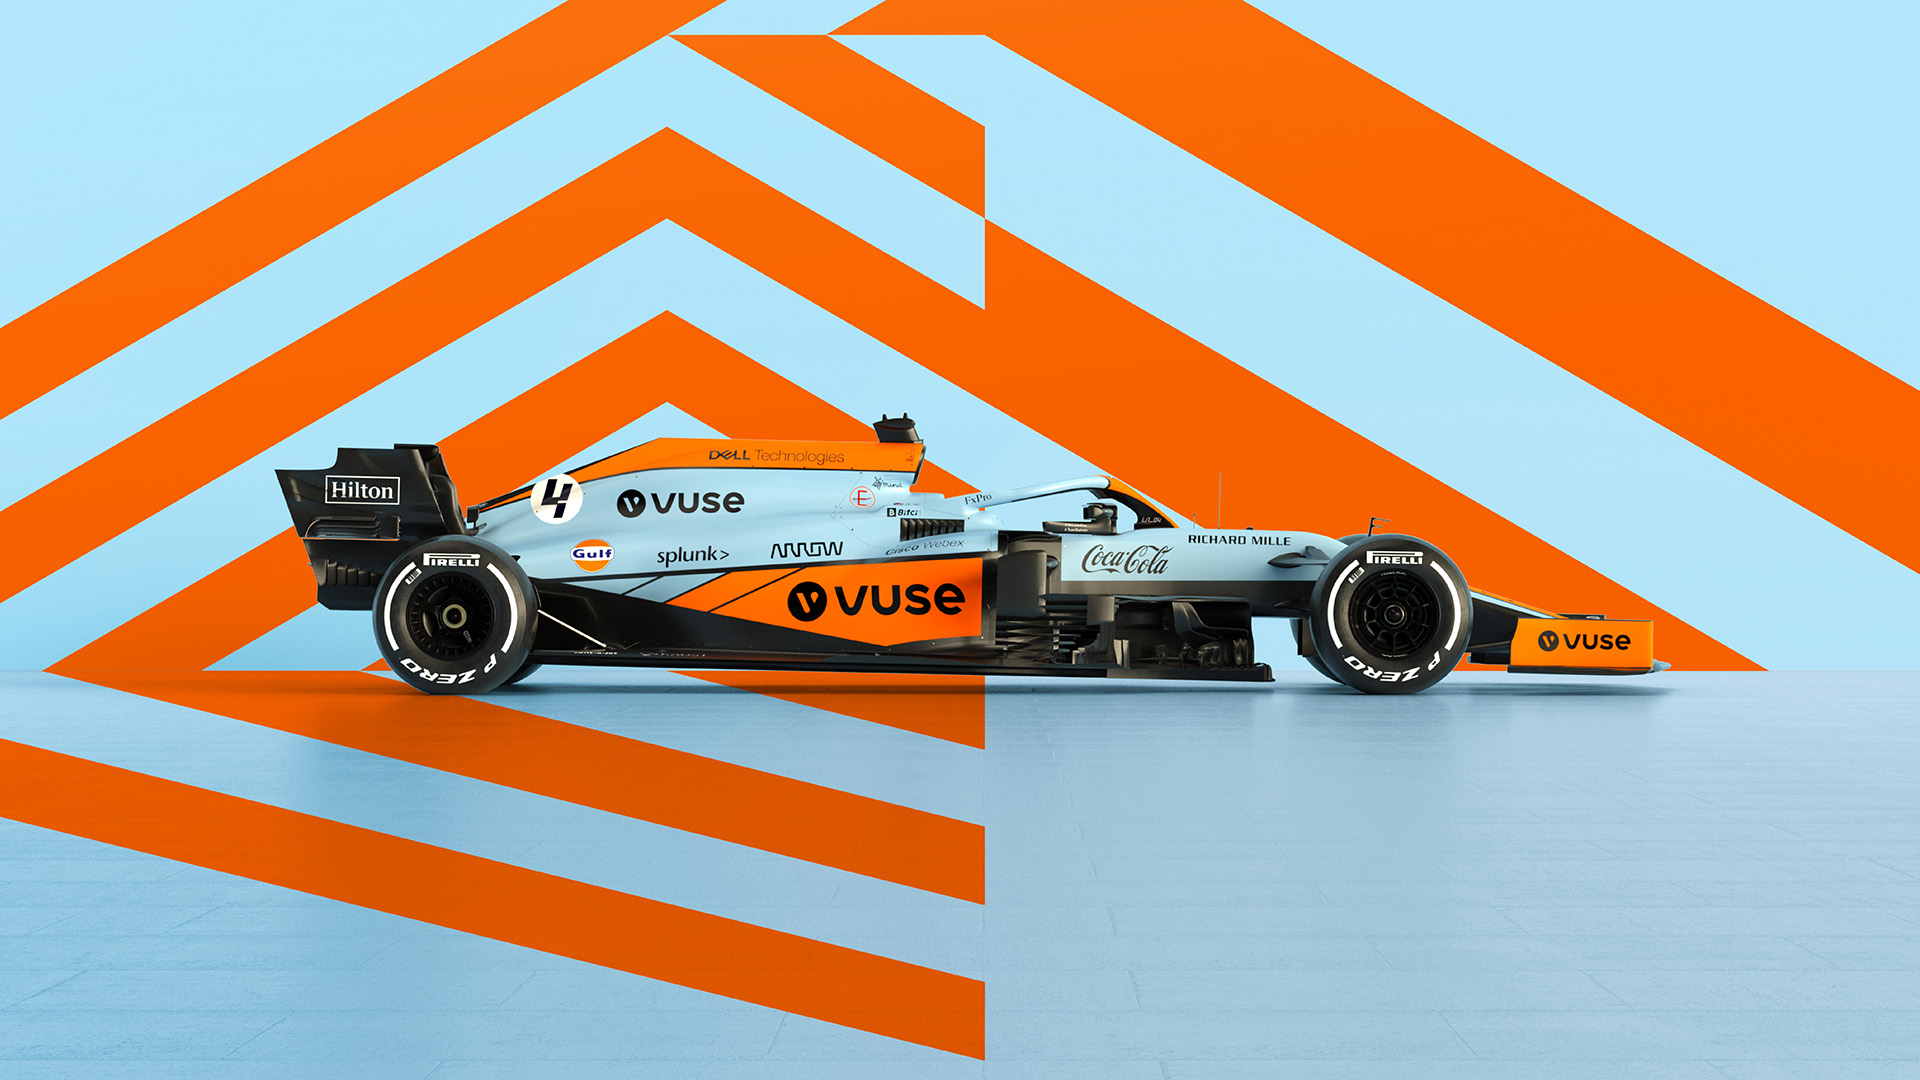 How Fan Power Inspired Mclaren To Go With A Special Livery For